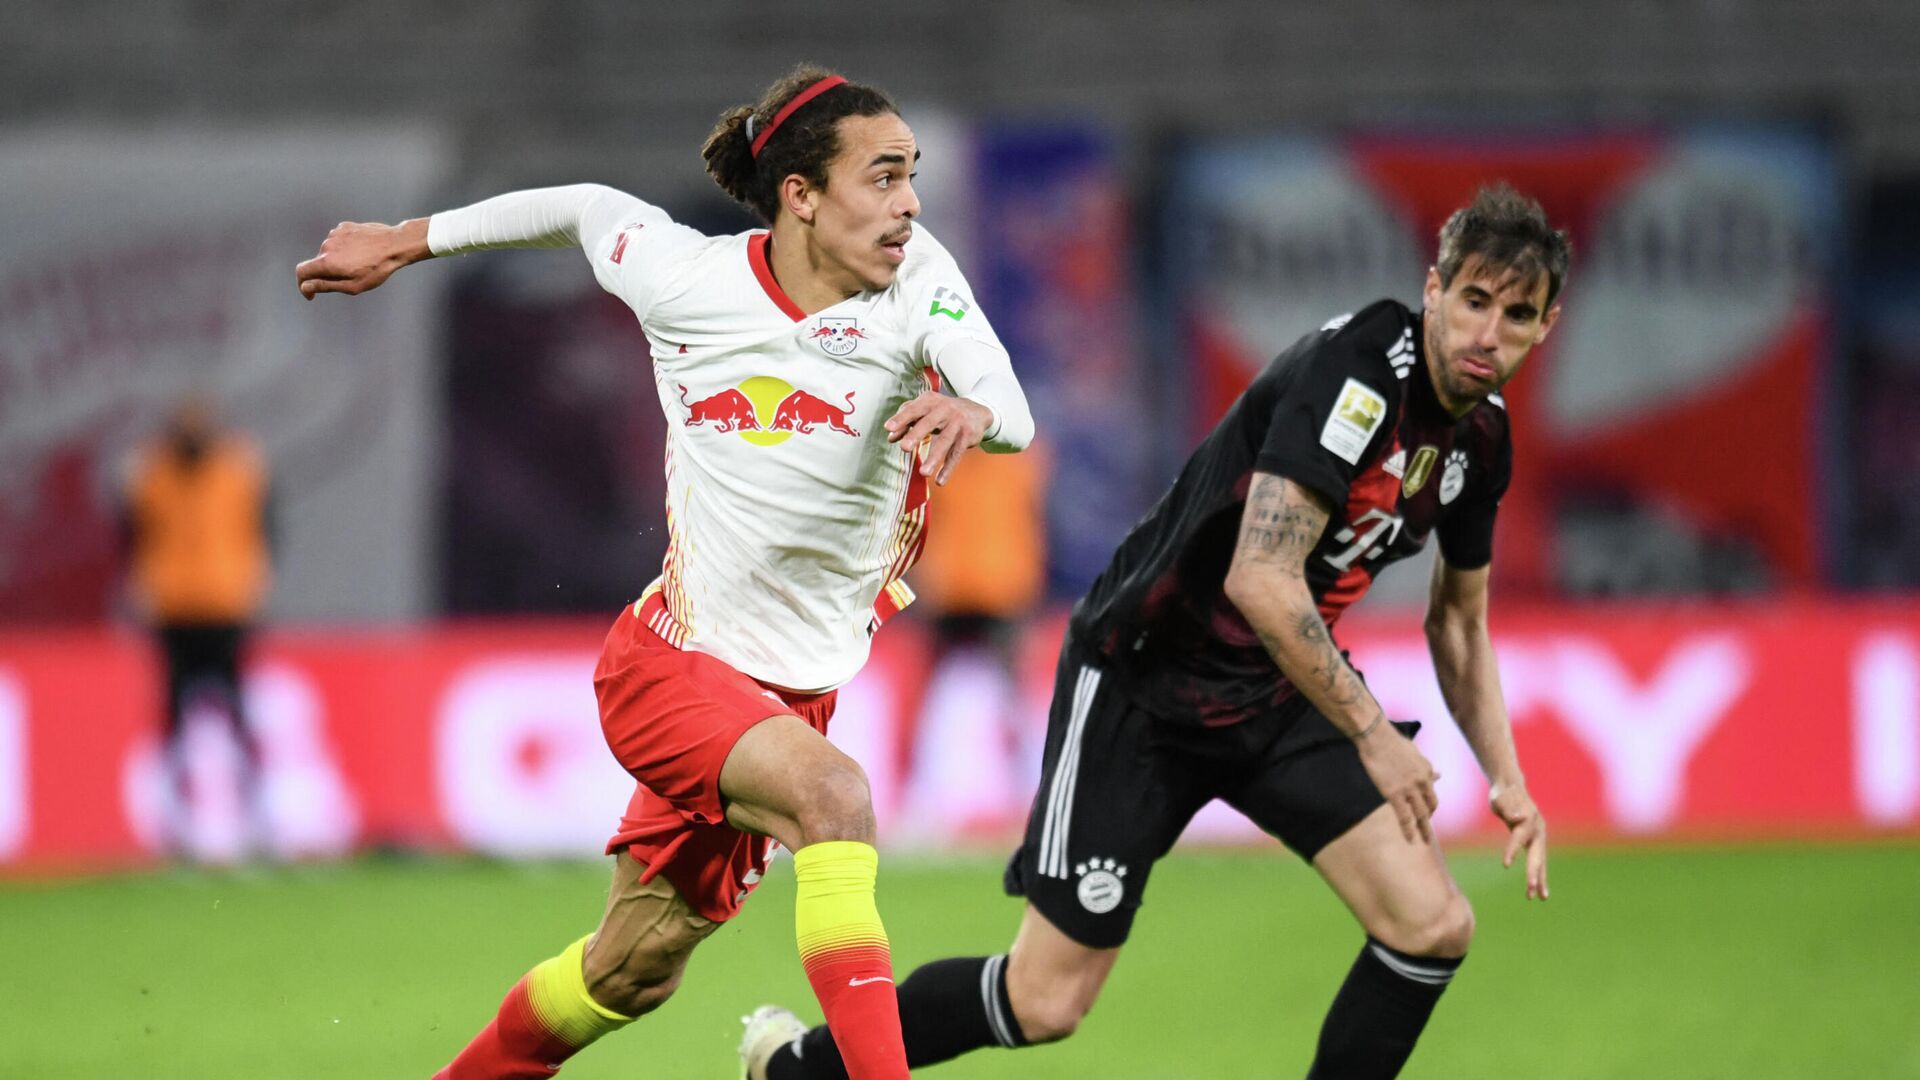 Leipzig's Danish forward Yussuf Poulsen (L) and Bayern Munich's Spanish midfielder Javier Martinez vie for the ball during the German first divison Bundesliga football match between RB Leipzig and FC Bayern Munich in Leipzig, eastern Germany, on April 3, 2021. (Photo by ANNEGRET HILSE / POOL / AFP) / DFL REGULATIONS PROHIBIT ANY USE OF PHOTOGRAPHS AS IMAGE SEQUENCES AND/OR QUASI-VIDEO - РИА Новости, 1920, 03.04.2021